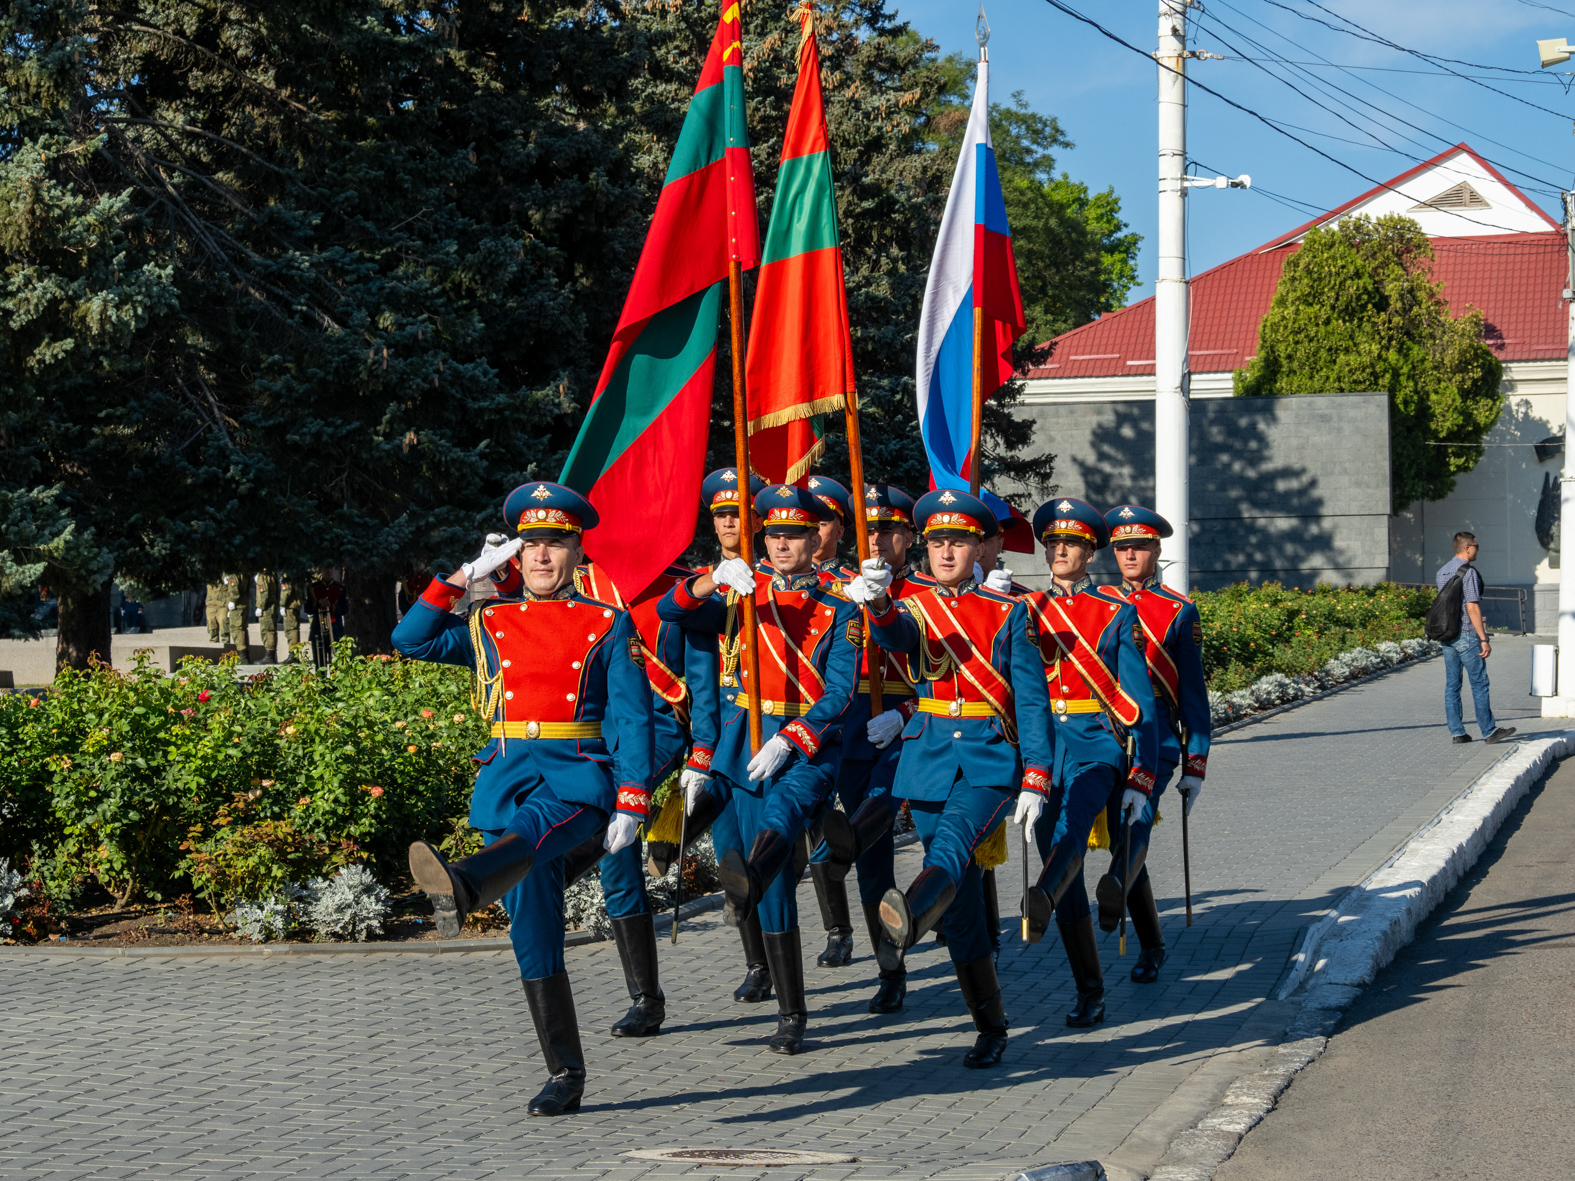 TIRASPOL, TRANSNISTRIA / MOLDOVA - SEPTEMBER 2:  The PMR honour Guard march towards the Memorial of Military Glory for a flower laying ceremony on Republic Day on September 2, 2023 in Tiraspol, Moldova (Pridnestrovian Moldavian Republic). Tiraspol is the capital of Transnistria situated on the eastern bank of the Dniester River. Republic Day is the main state holiday. Transnistria broke away from Moldova in 1990 and is unrecognised by the international community as an independent state. The de-facto administration of Transnistria is supported economically, diplomatically, and militarily by Russia, which is believed to have 1,500 soldiers stationed there. (Photo by Peter Dench/Getty Images)